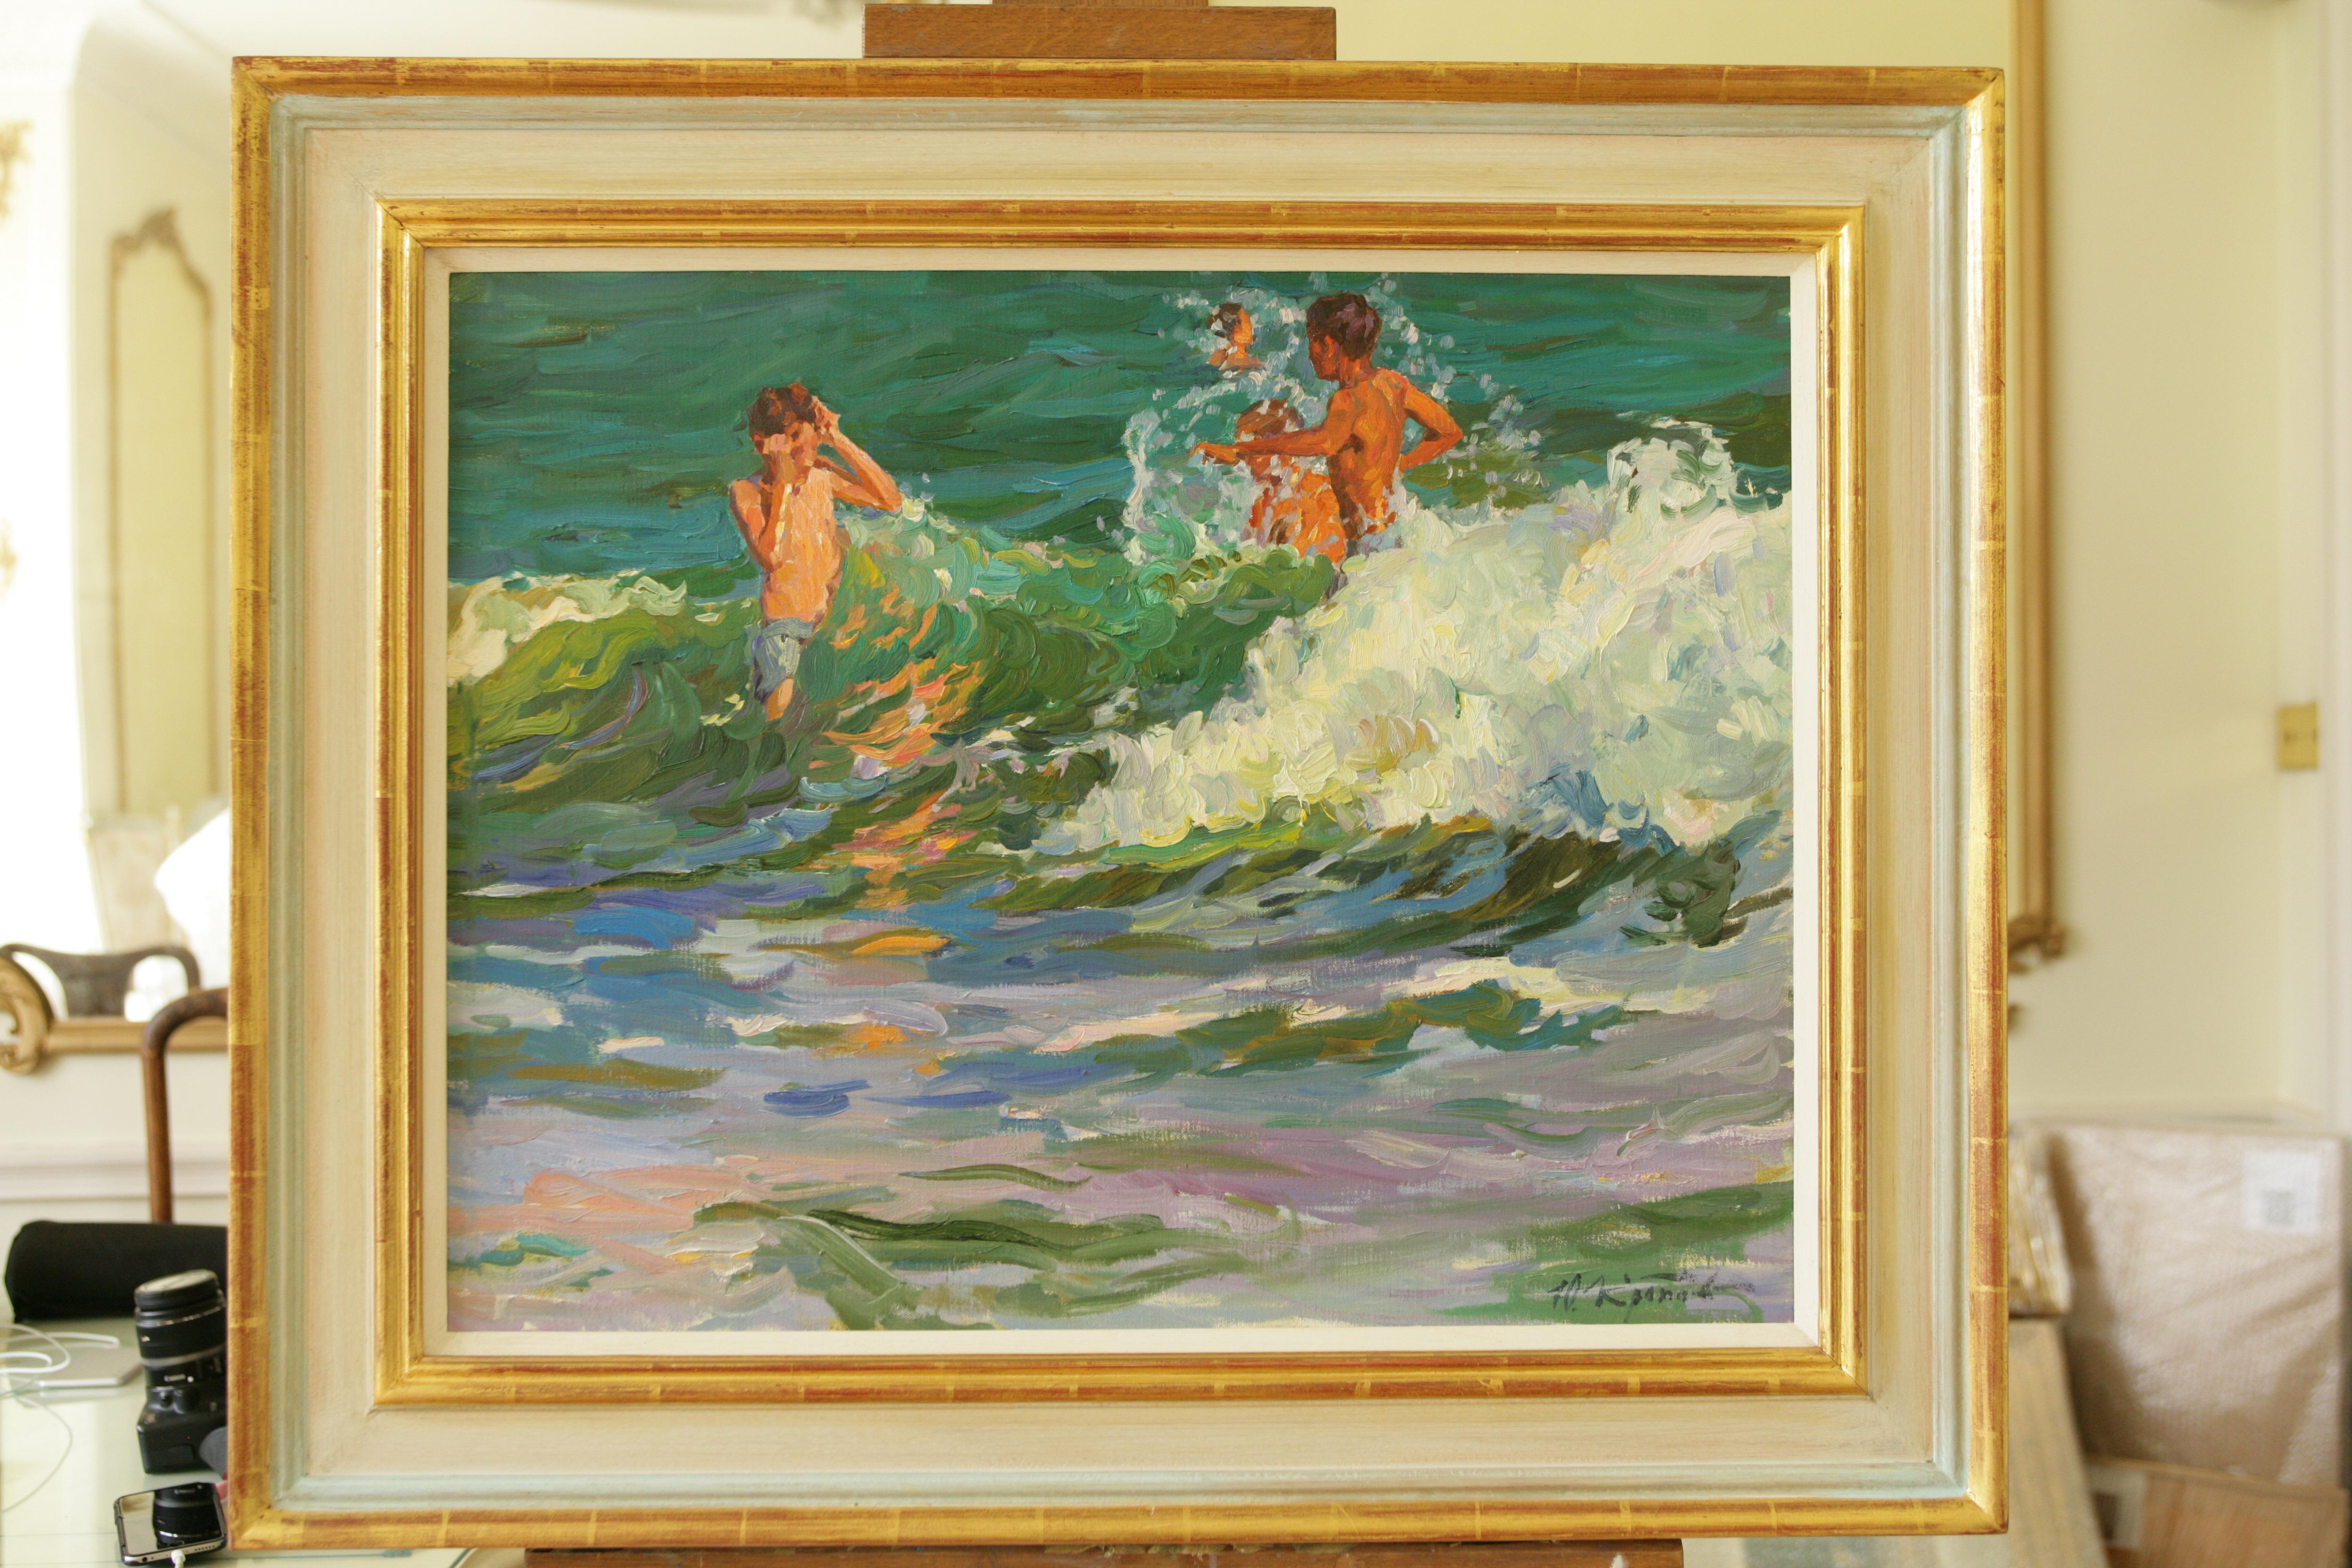  Jumping Waves , , Yuri Krotov contemporary Russian Impressionist oil painting   For Sale 1